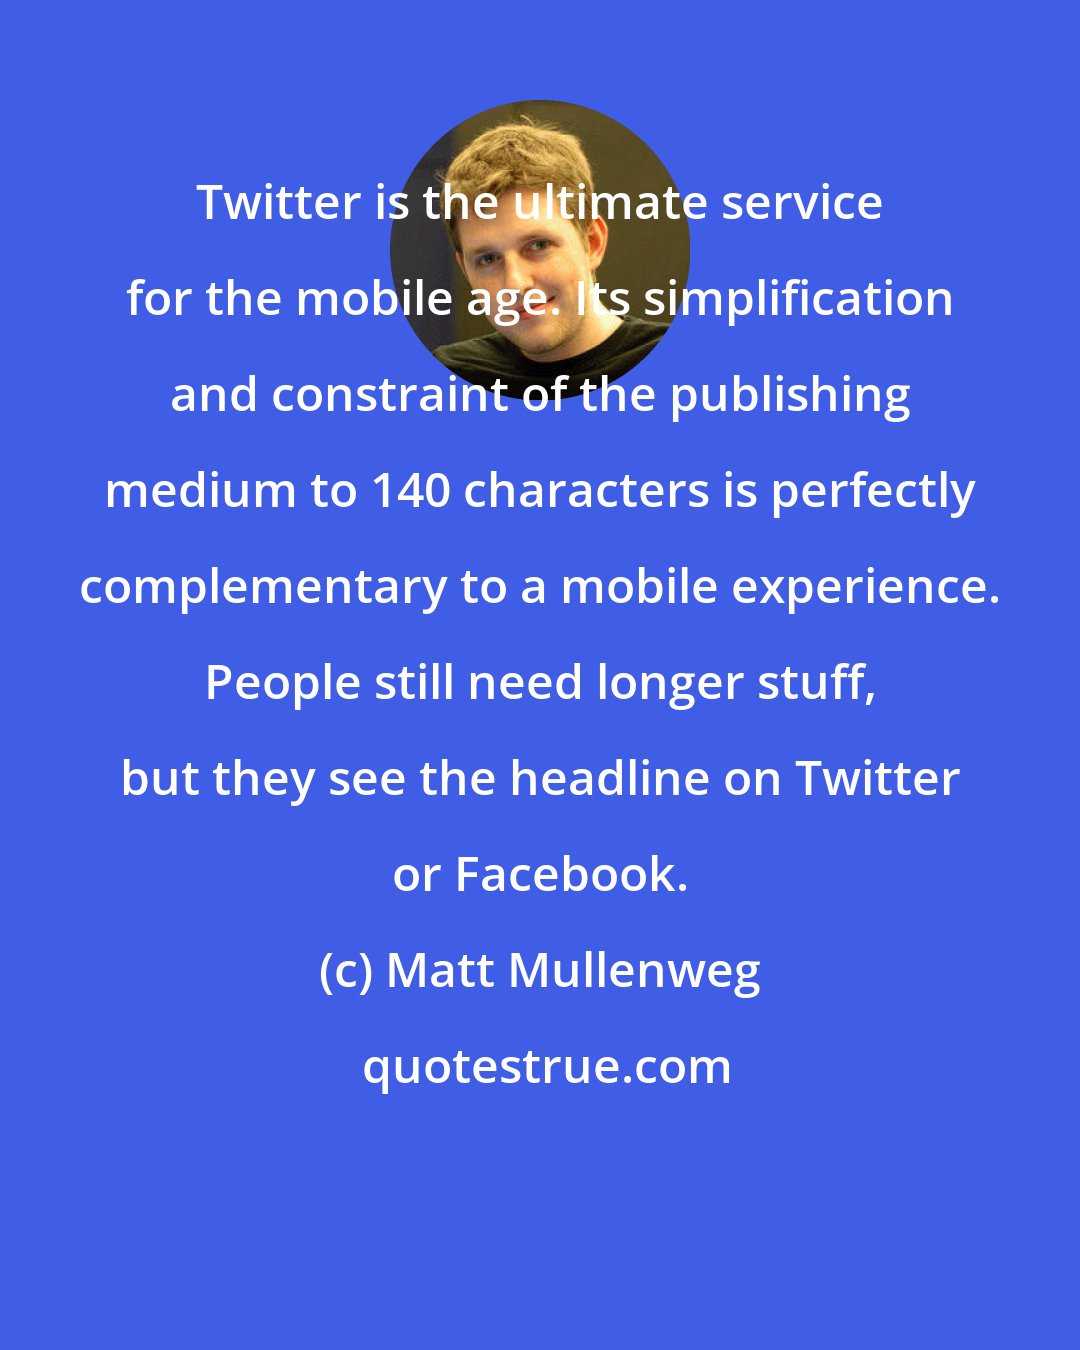 Matt Mullenweg: Twitter is the ultimate service for the mobile age. Its simplification and constraint of the publishing medium to 140 characters is perfectly complementary to a mobile experience. People still need longer stuff, but they see the headline on Twitter or Facebook.